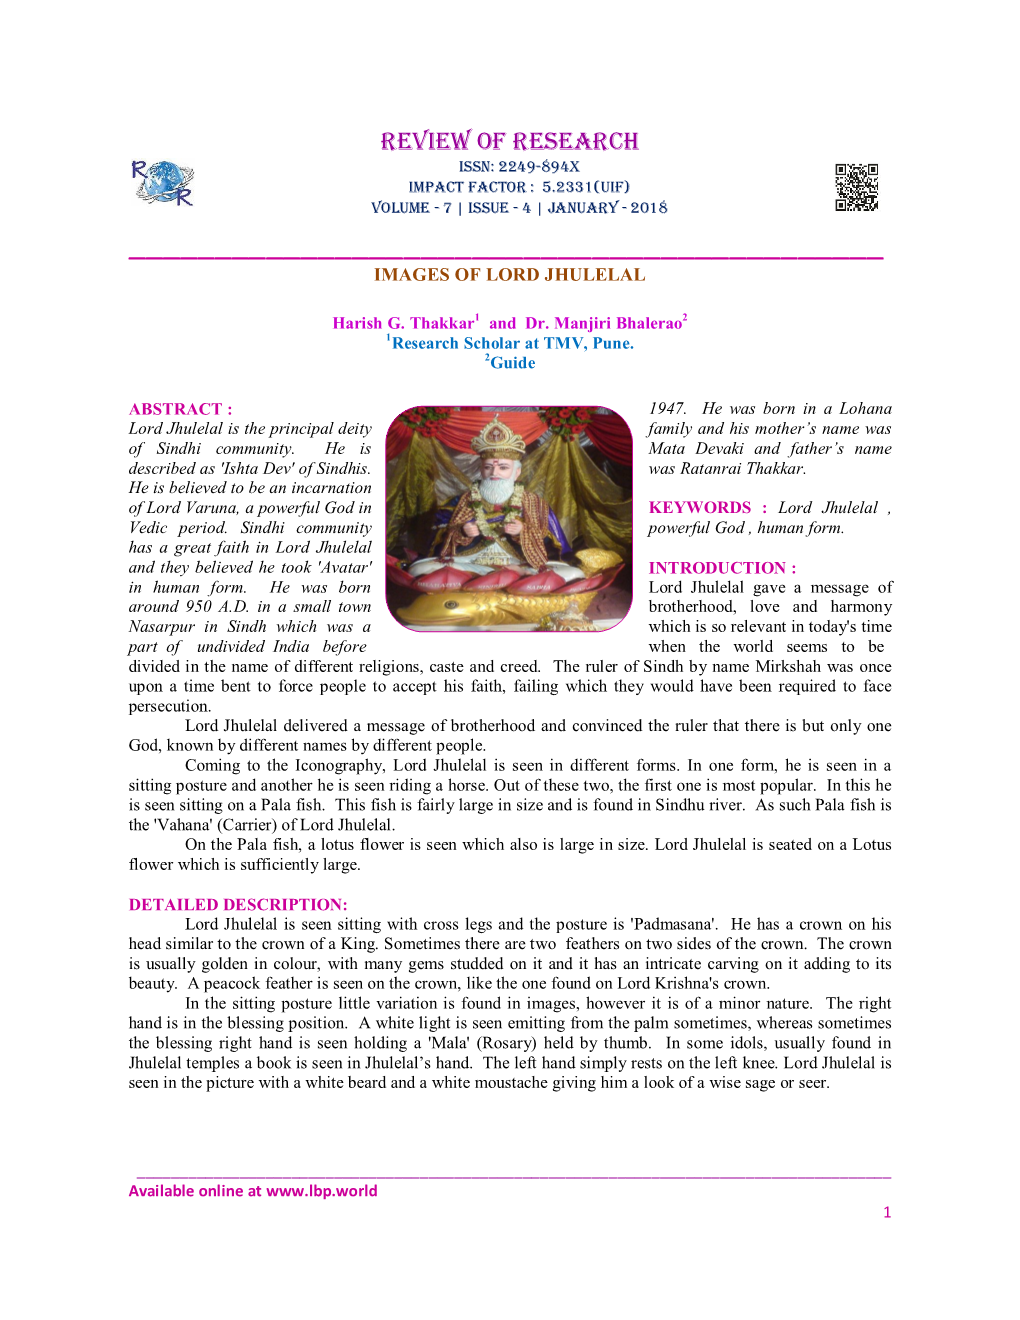 Review of Research Issn: 2249-894X Impact Factor : 5.2331(Uif) Volume - 7 | Issue - 4 | January - 2018 ______IMAGES of LORD JHULELAL